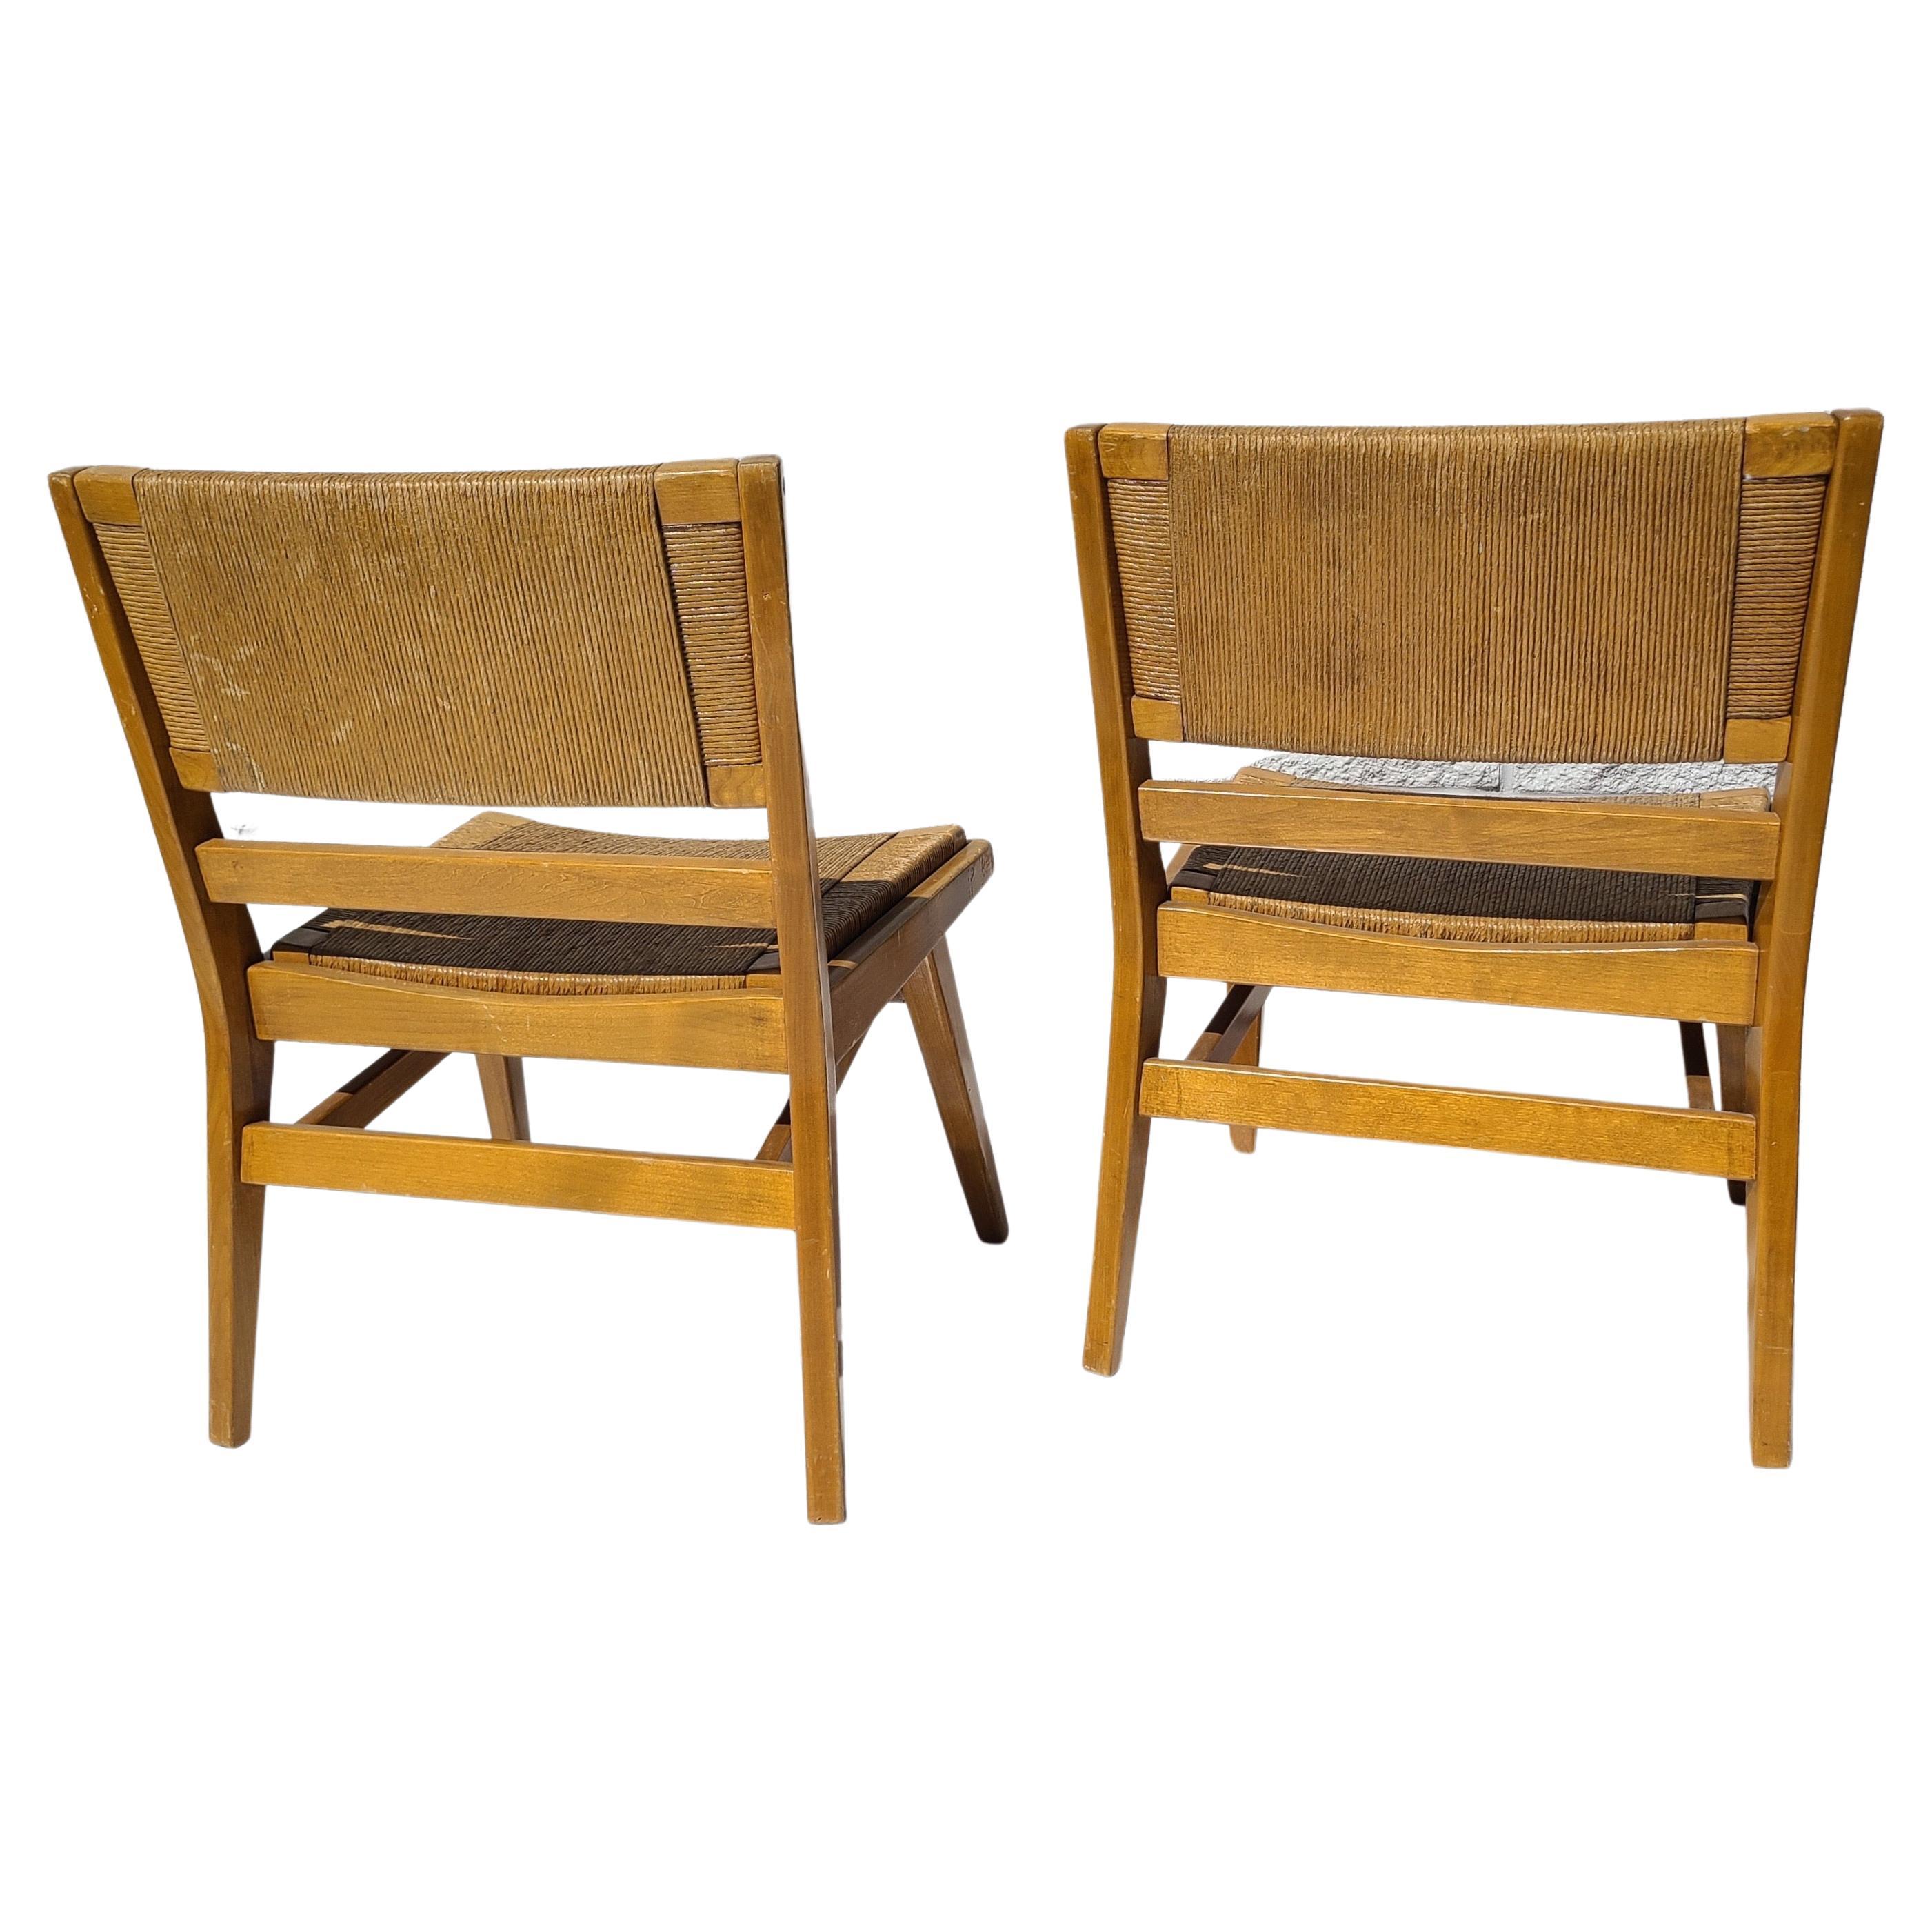 Mid-20th Century Pair Walnut Tacoma Chairs by Warner Cleveland